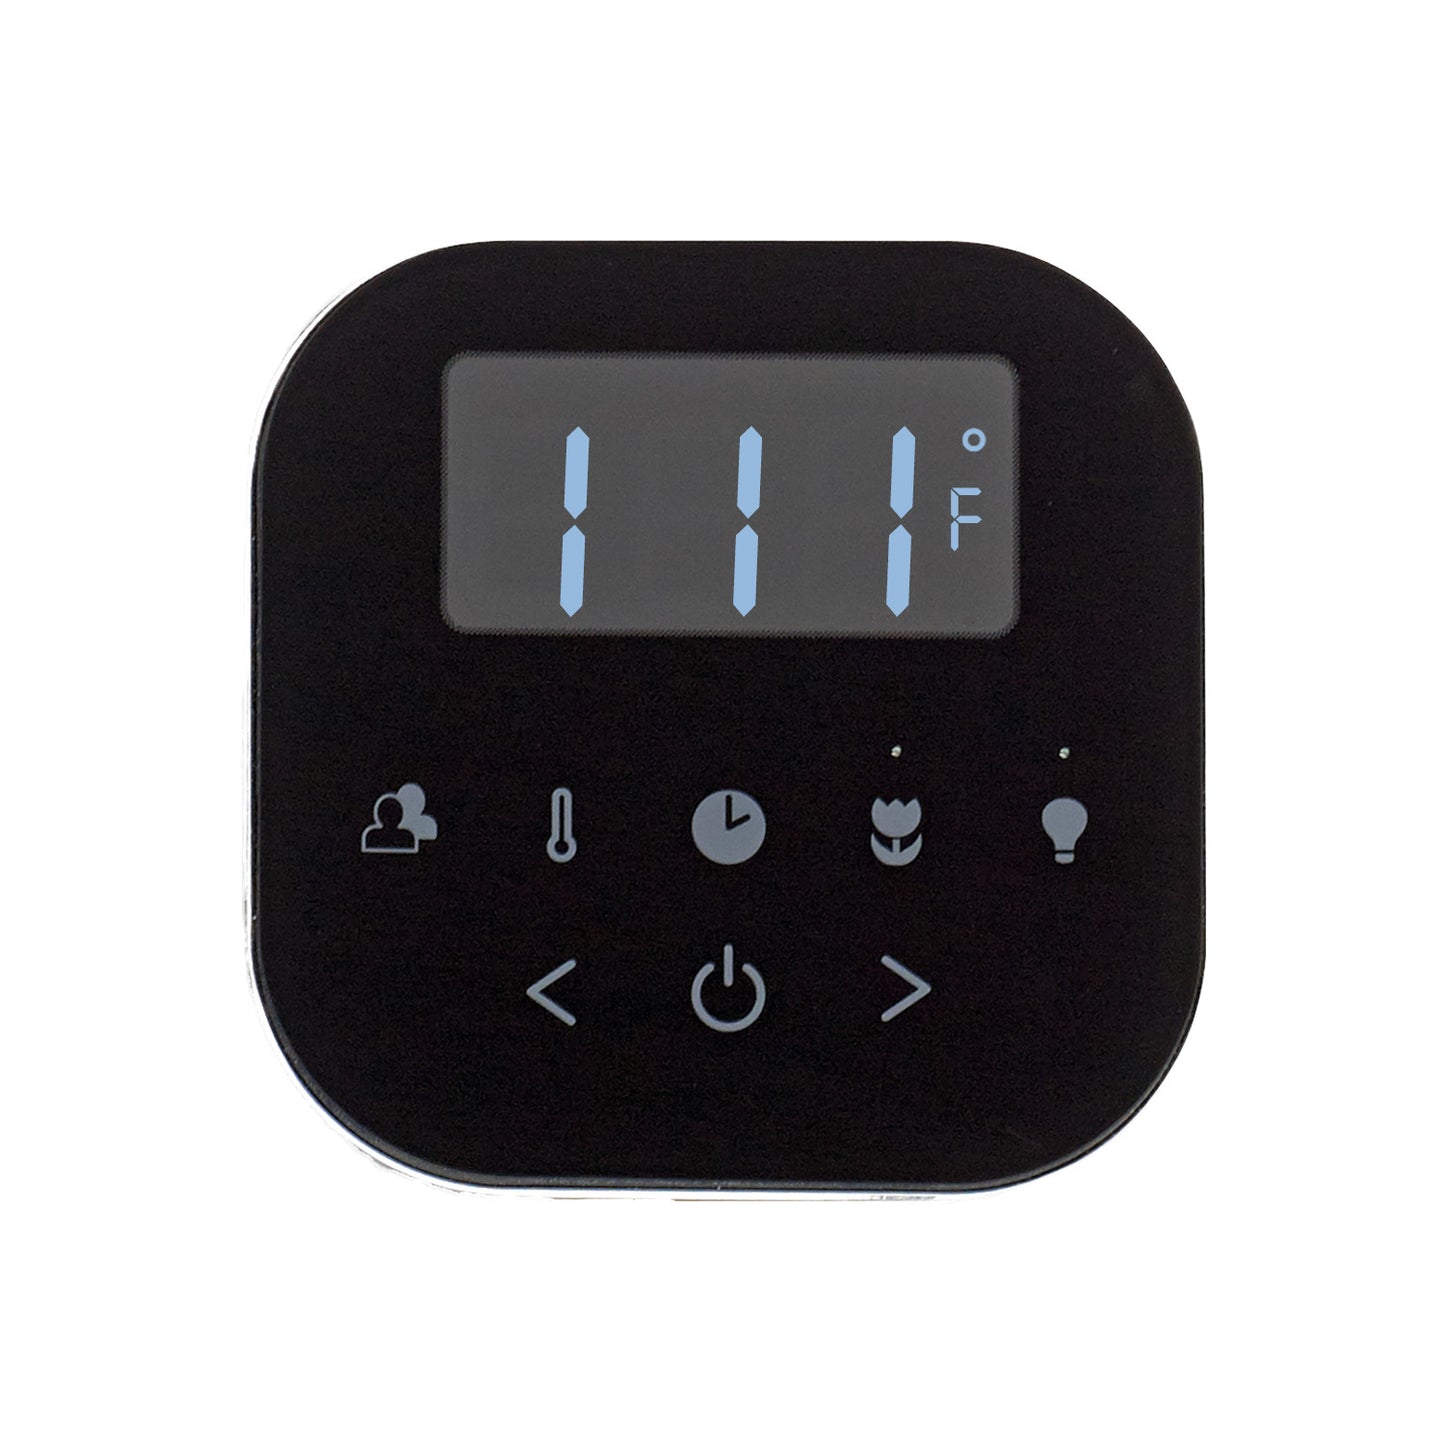 AirTempo Steam Shower Control in Black with Oil Rubbed Bronze